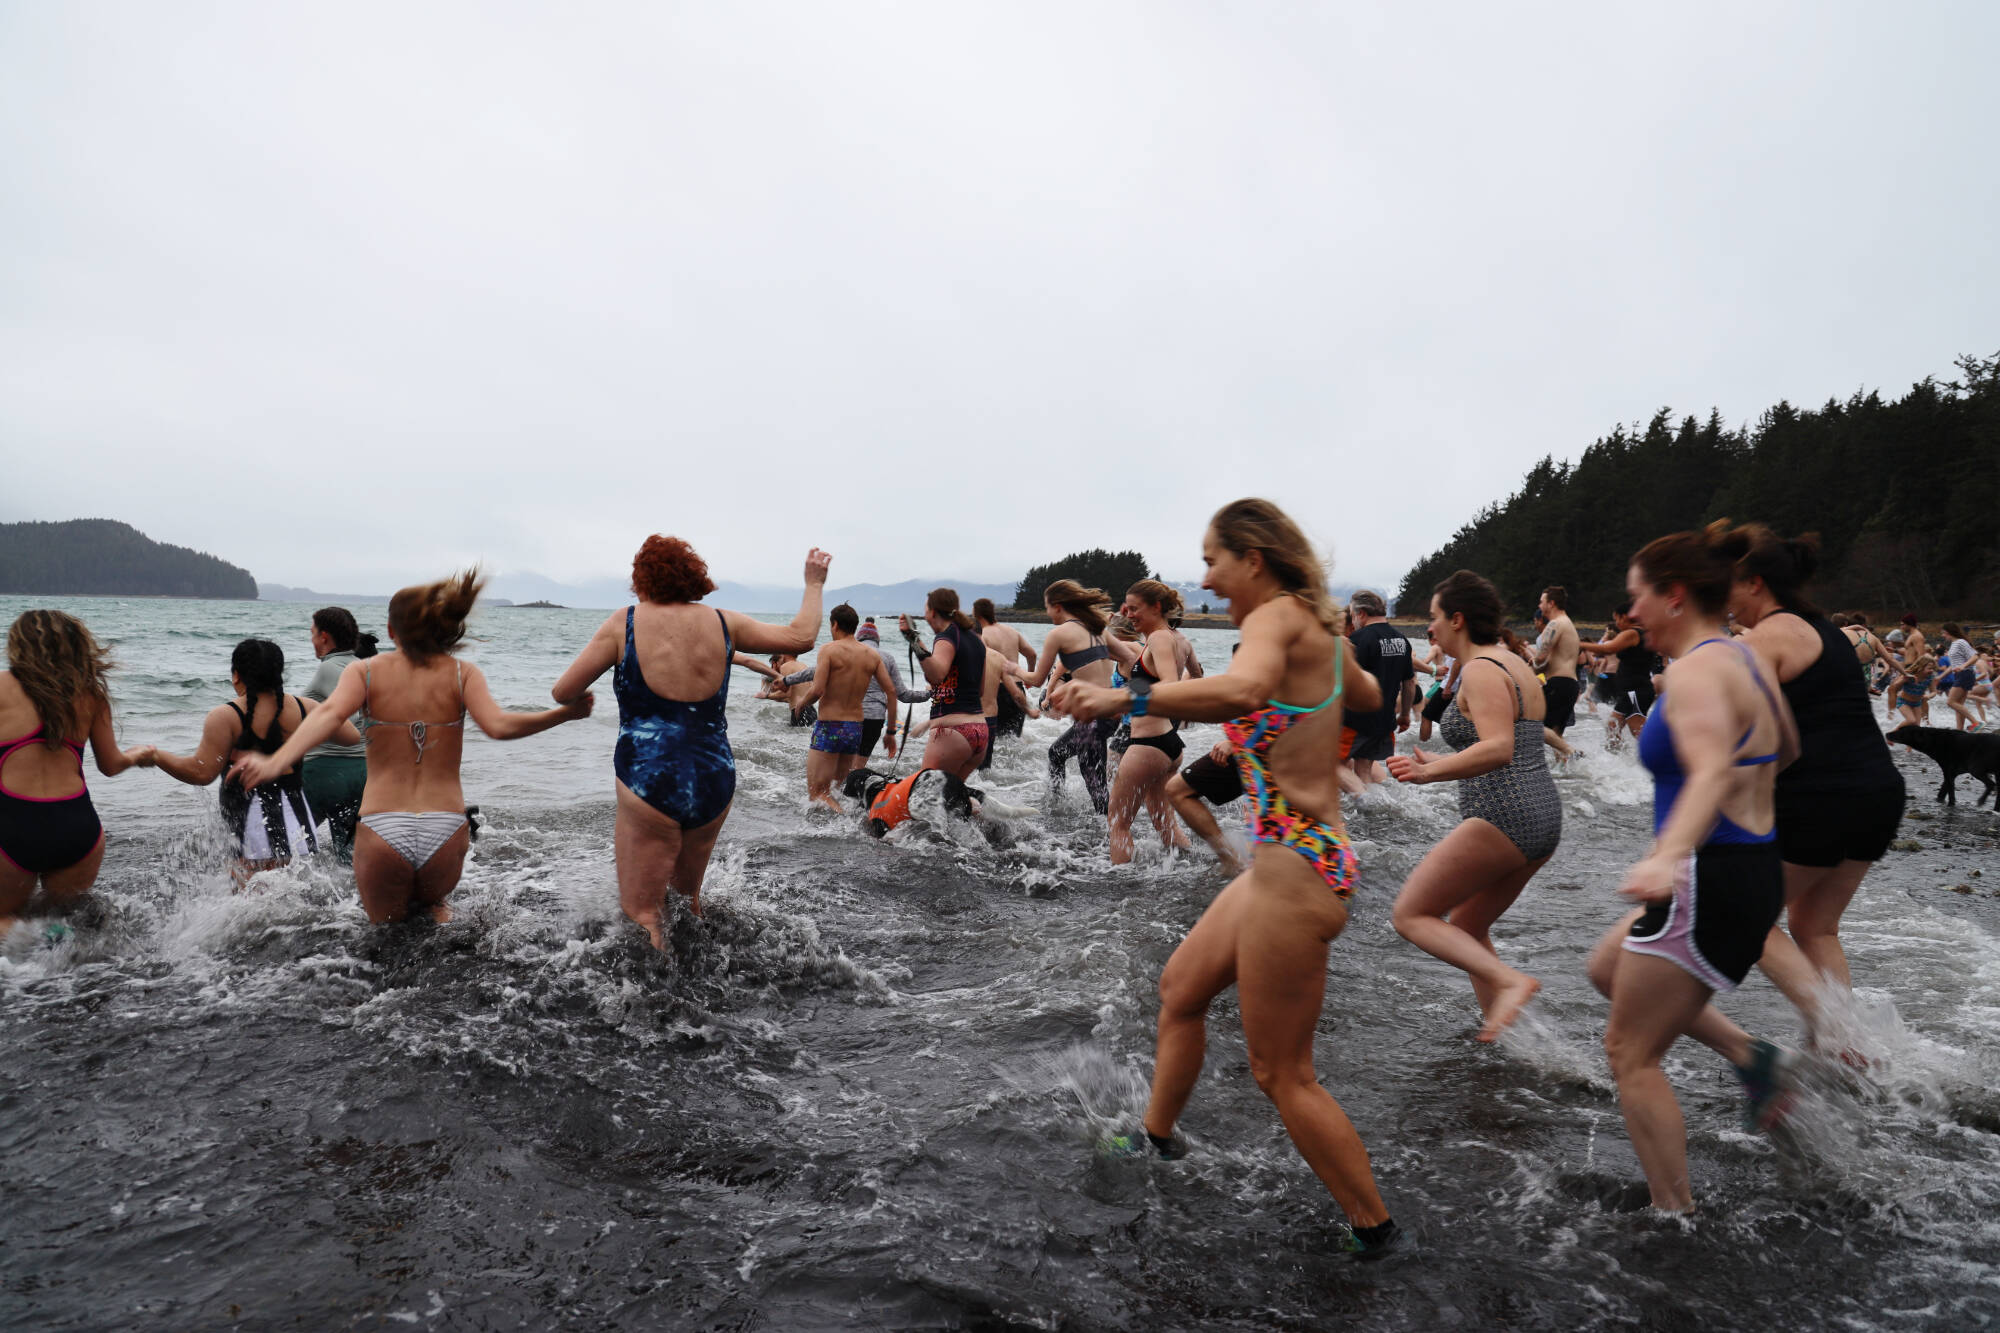 Dozens of people run into the cold ocean water on a cloudy Sunday afternoon for the annual Polar Dip at the Auke Recreation Area. (Clarise Larson / Juneau Empire)